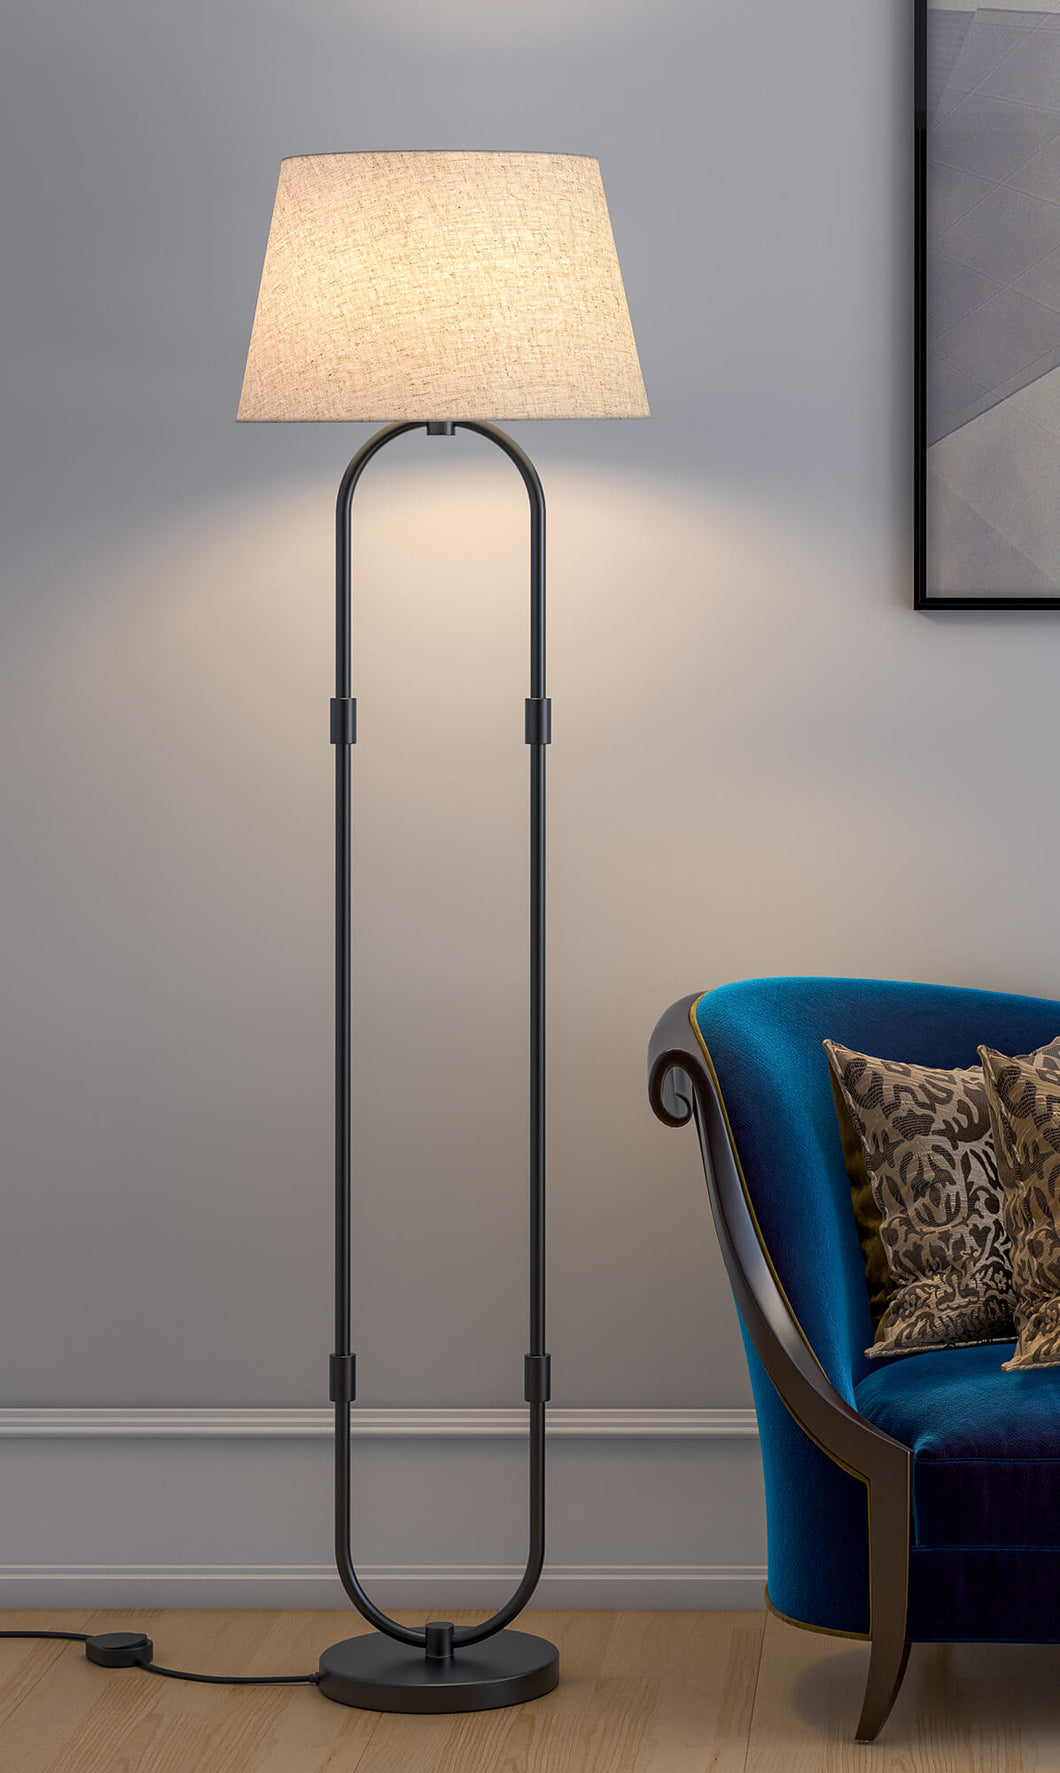 Modern Floor Lamp Standing Black Polished for Living room, Bedroom - 5ft Height with Off White Lamp Shade